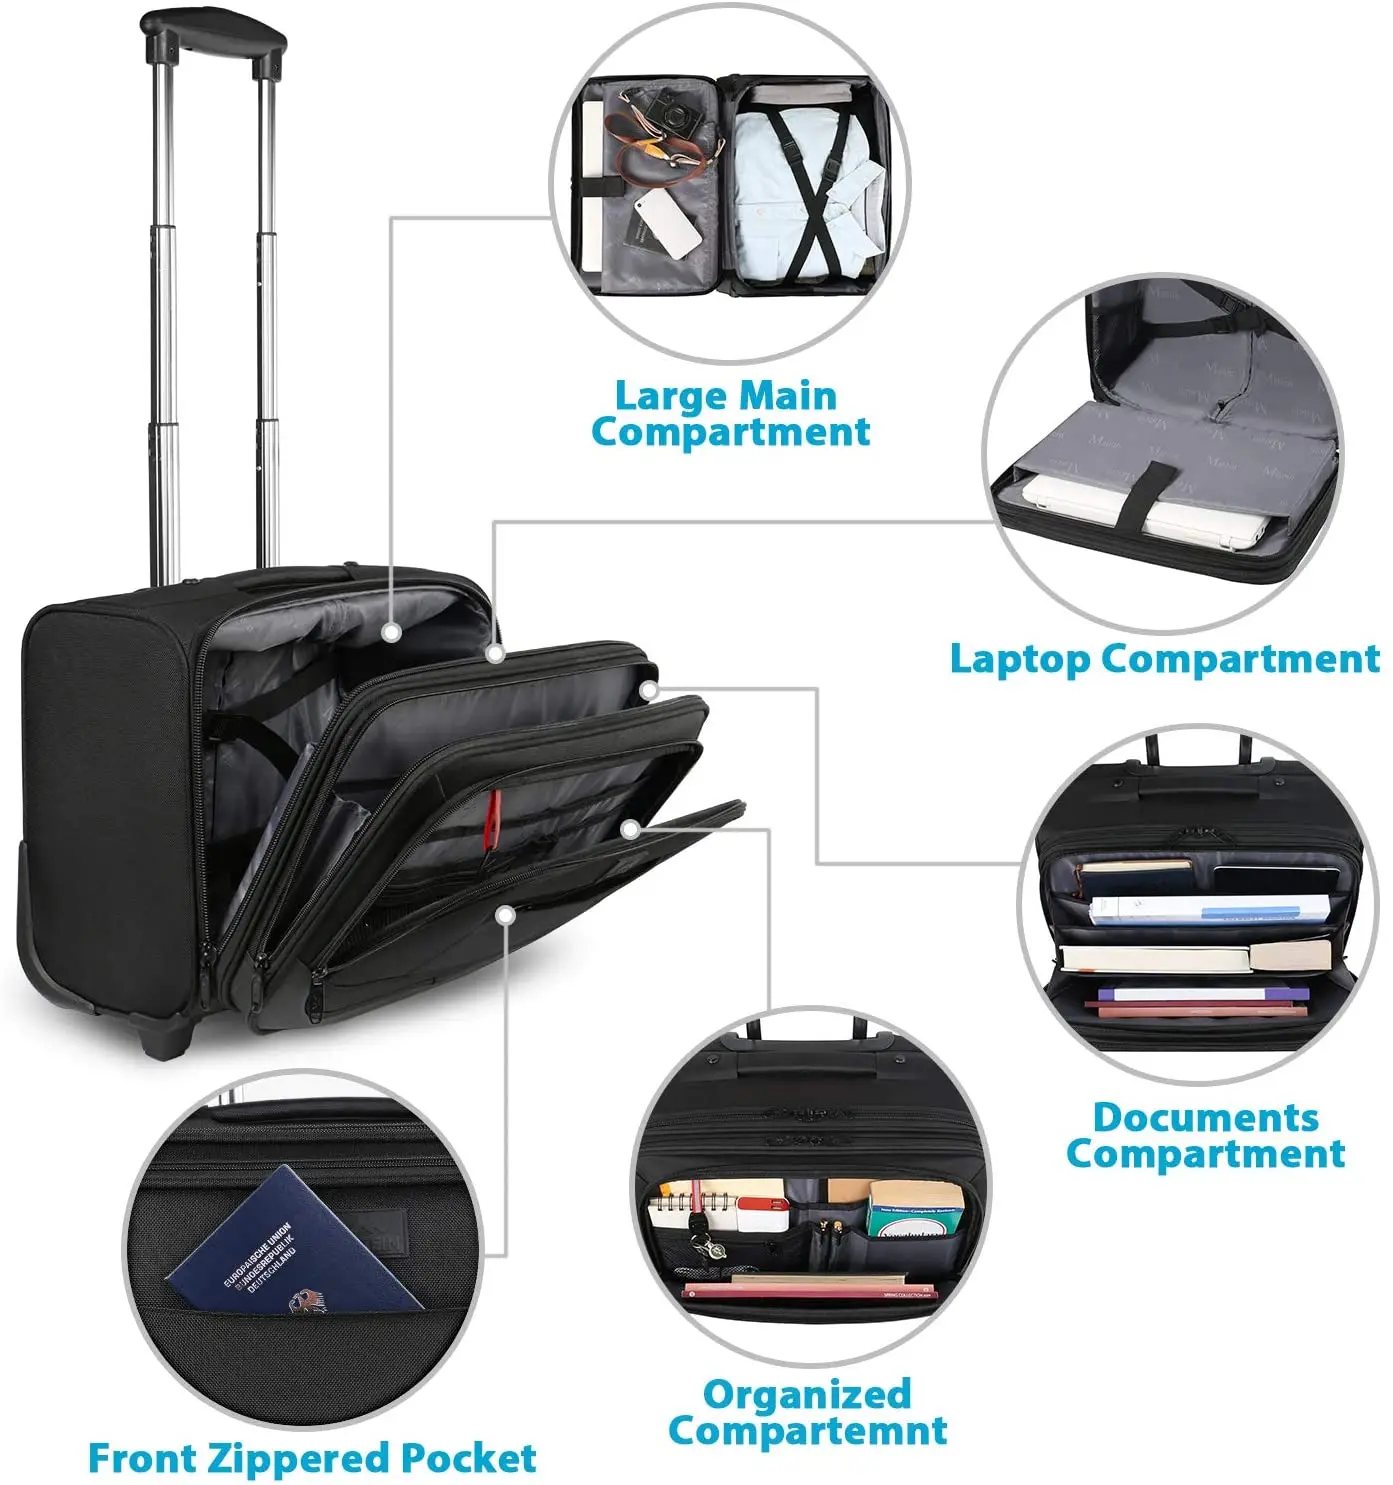 

17 Inch Laptop Carry on Trolley Business Luggage Case Square Travel Bag School College Rolling Briefcase with Wheels